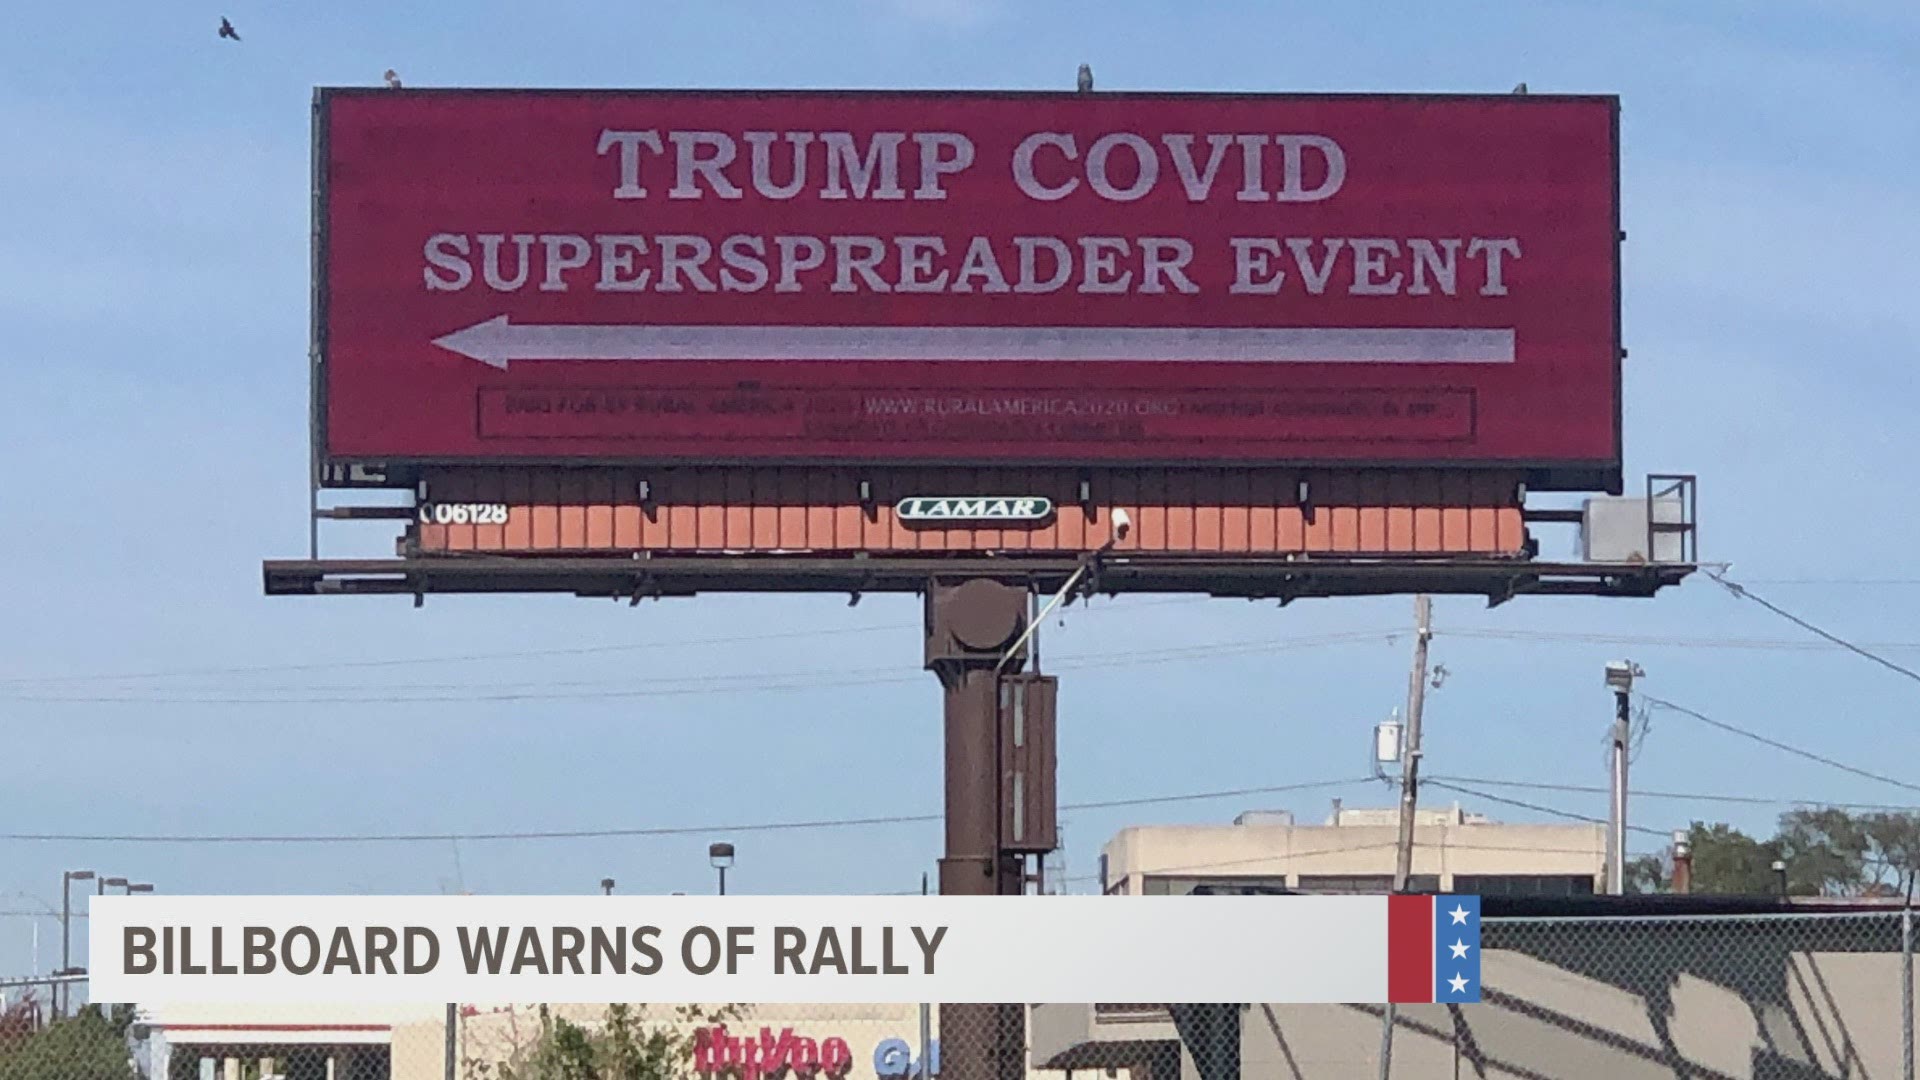 Rural America 2020 put up a billboard criticizing President Donald Trump's rally at Des Moines International Airport, in light of COVID-19 pandemic.